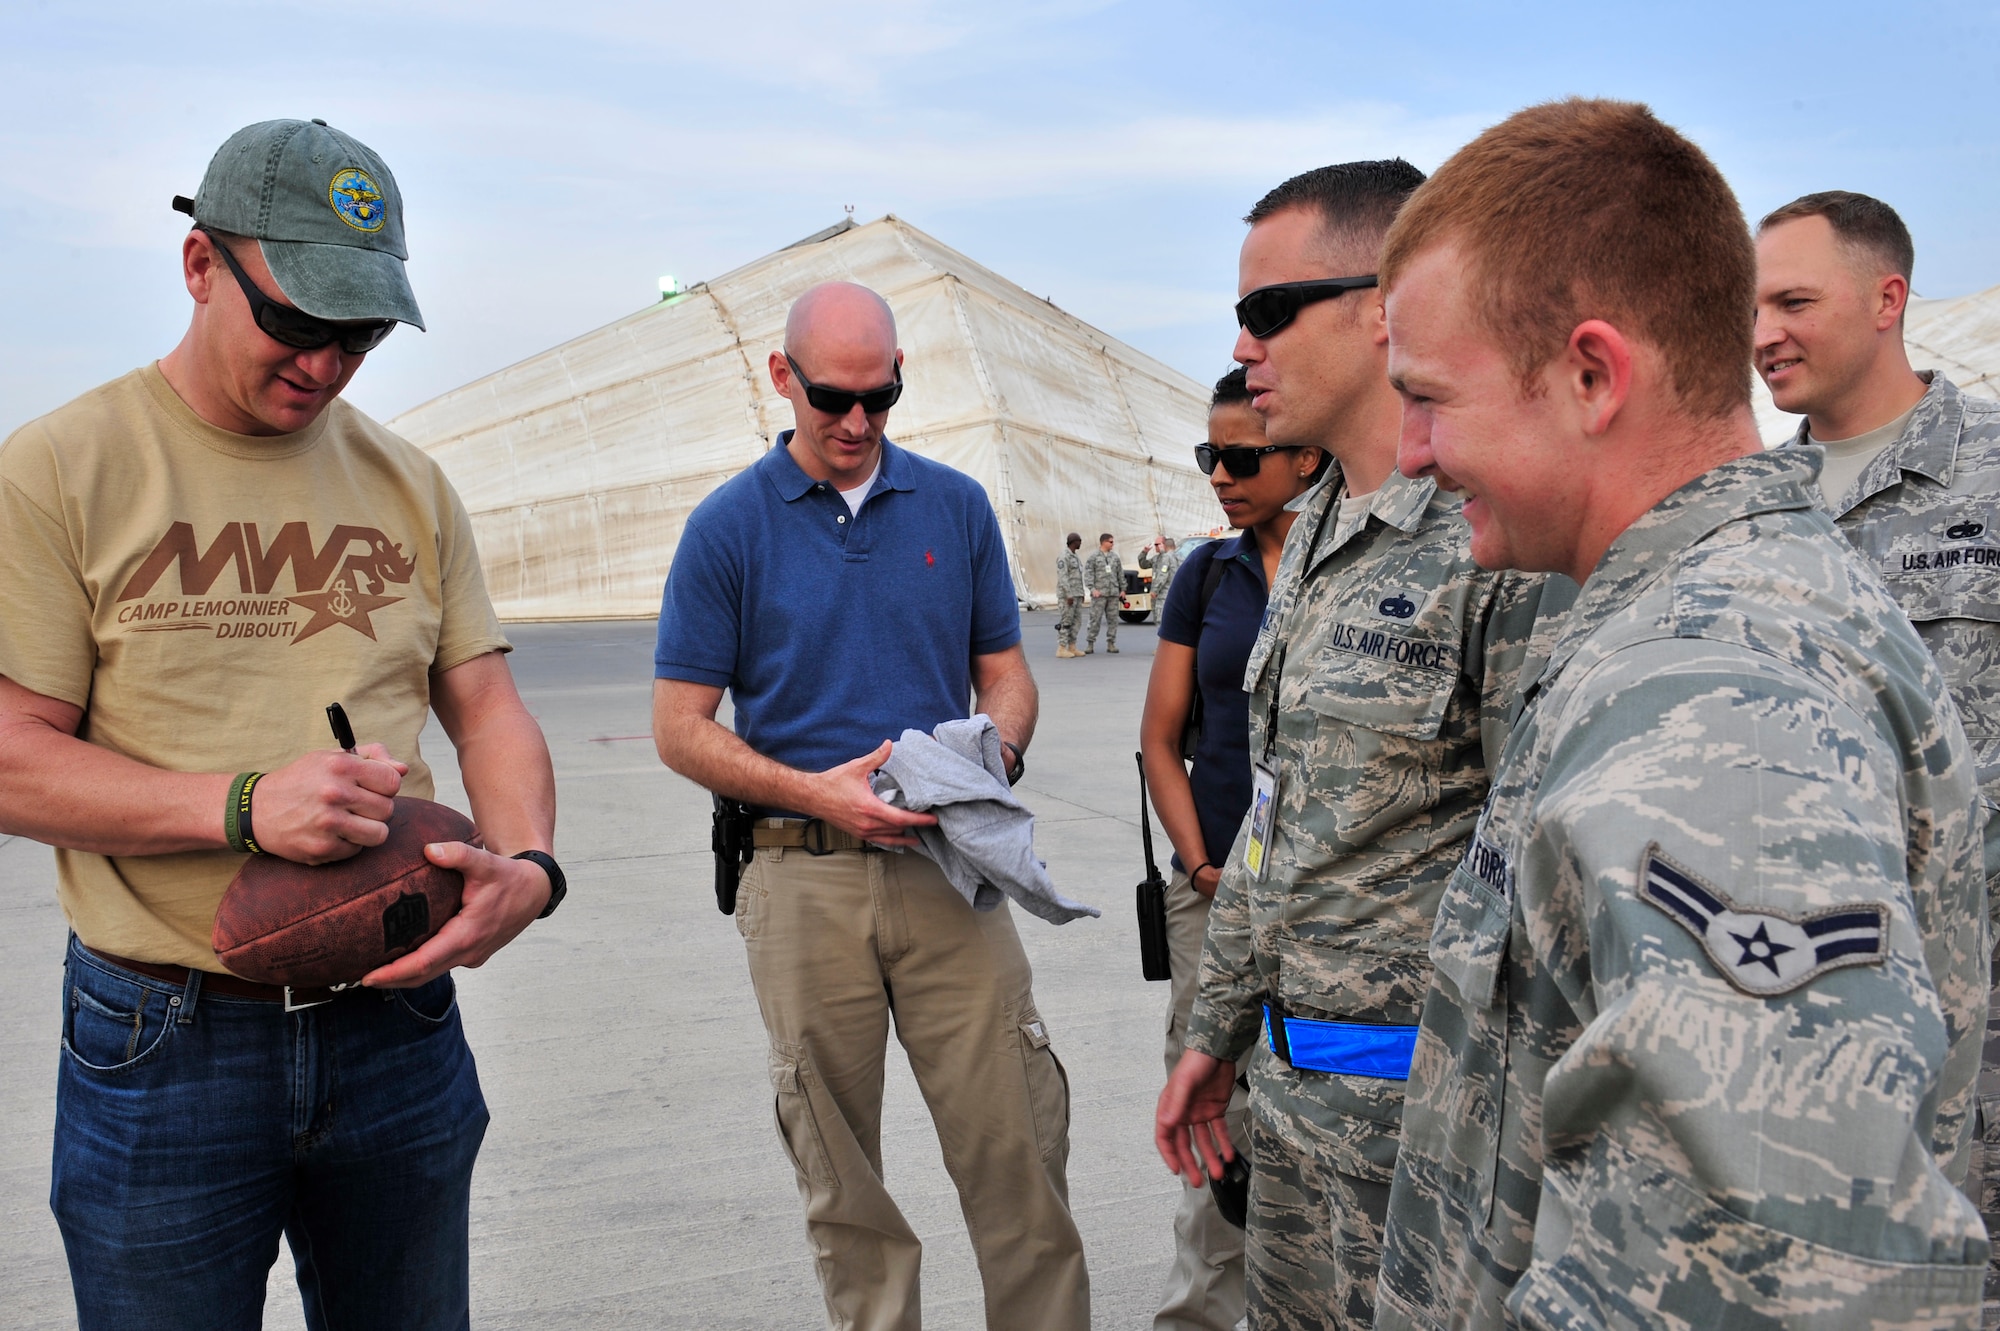 Denver Broncos Quarterback Peyton Manning autographs memorabilia for members of the 380th Air Expeditionary Wing at an undisclosed location in Southwest Asia Feb. 28, 2013. Manning visited the men and women of the 380 AEW to express the country’s gratitude for their service and sacrifice during the Vice Chairman of the Joint Chiefs of Staff Adm. James A. Winnefeld USO tour. (U.S. Air Force photo by Tech. Sgt. Christina M. Styer/Released)